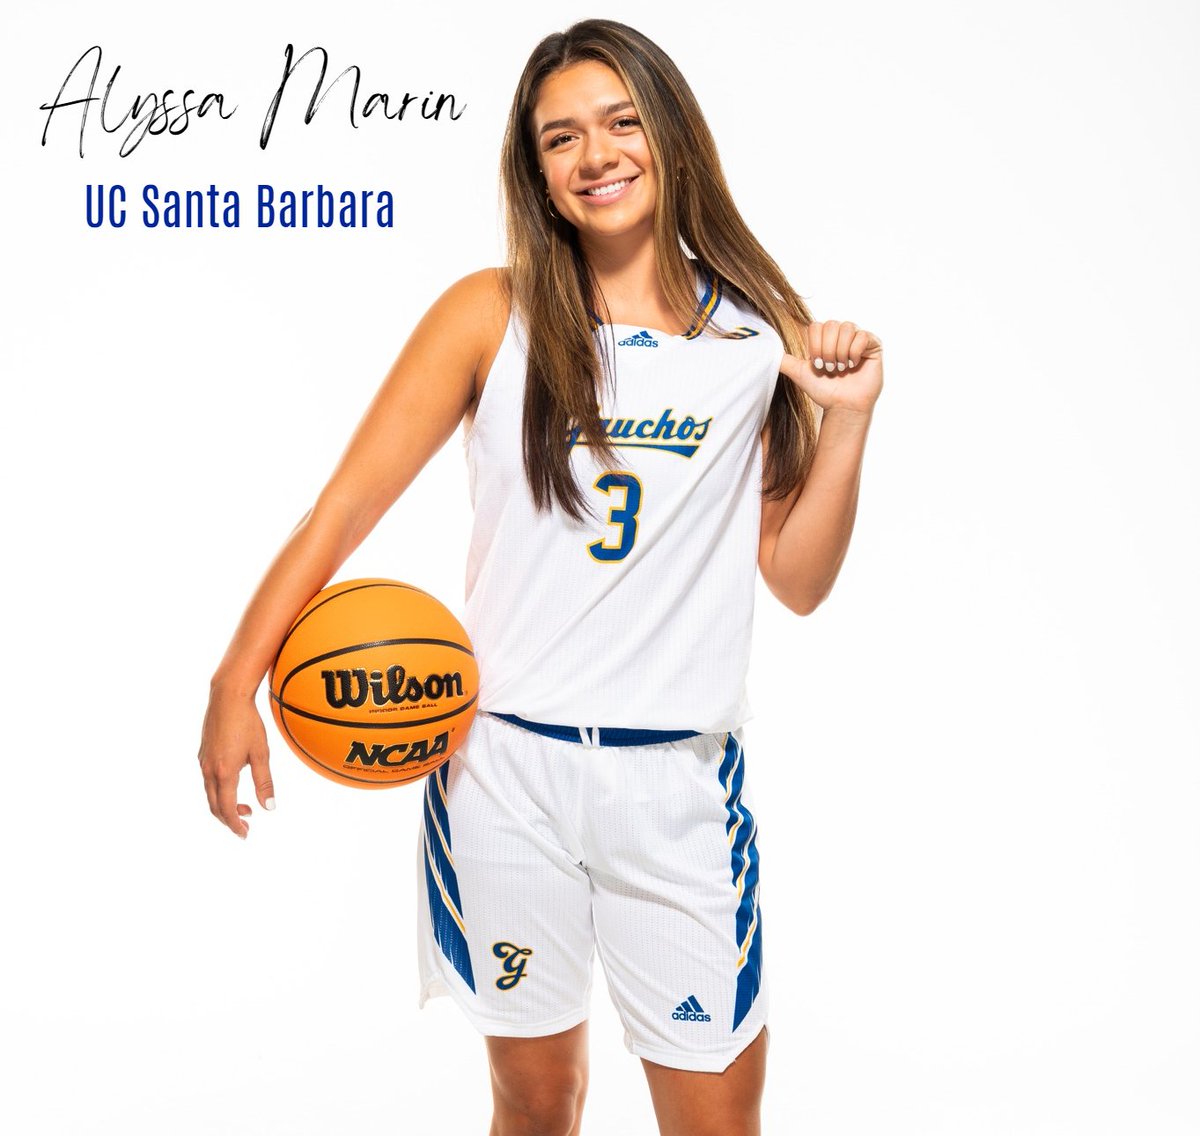 Troop West Alum Alyssa Marin is THE OG!!! Aside from being with us for our launch, she was our first player to sign D1 in 2020. Lyss was the starting PG for UCSB as a Junior, and will continue to be that this season!!! Proud of you Lyss!!! @MattyK31 @hoopers4dayz @SelectEventsBB